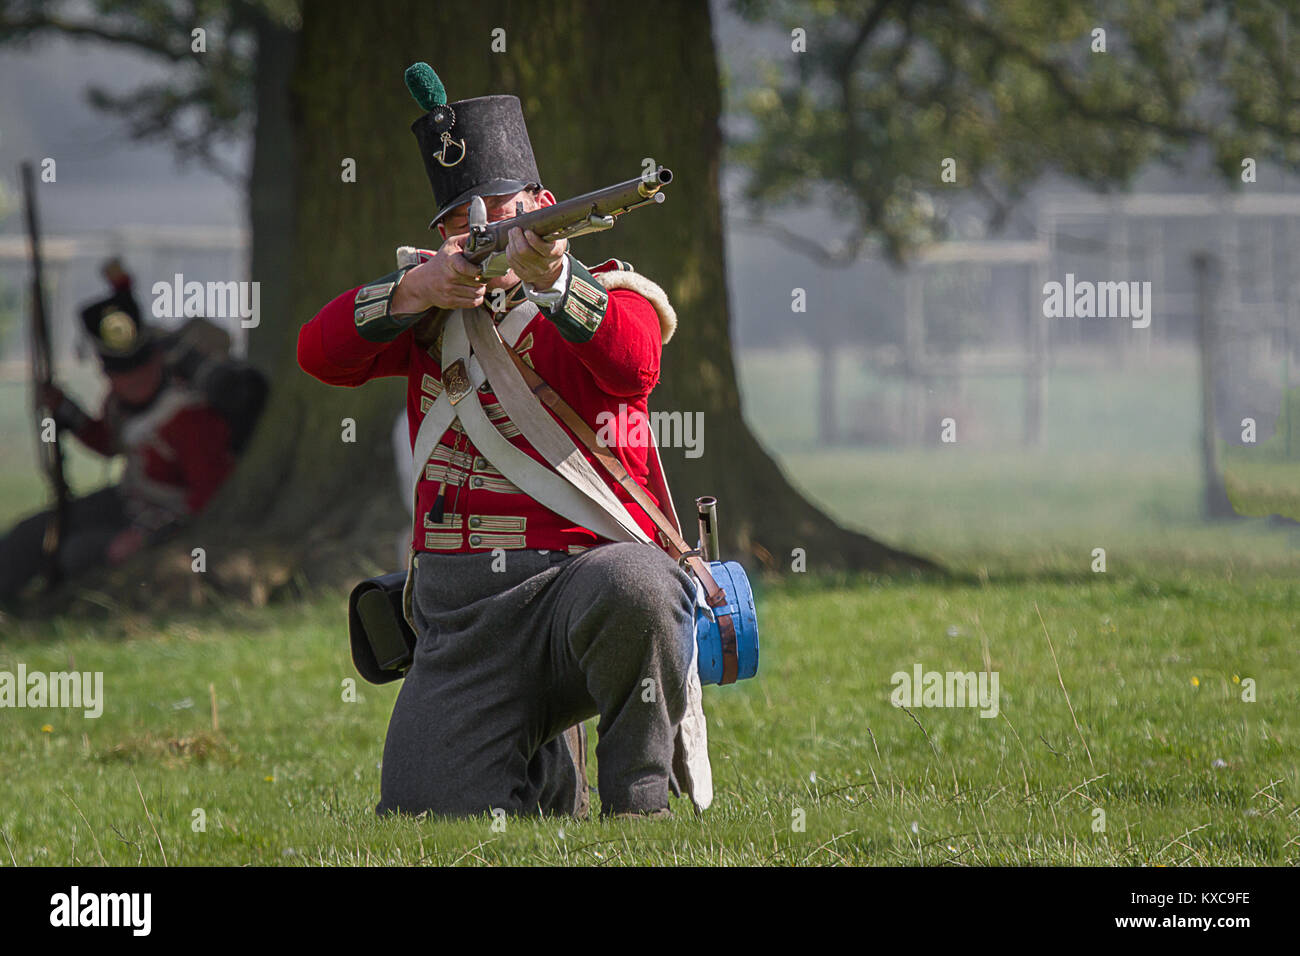 An english red coat kneeling down aiming his musket preparing to fire at a reenactment Stock Photo